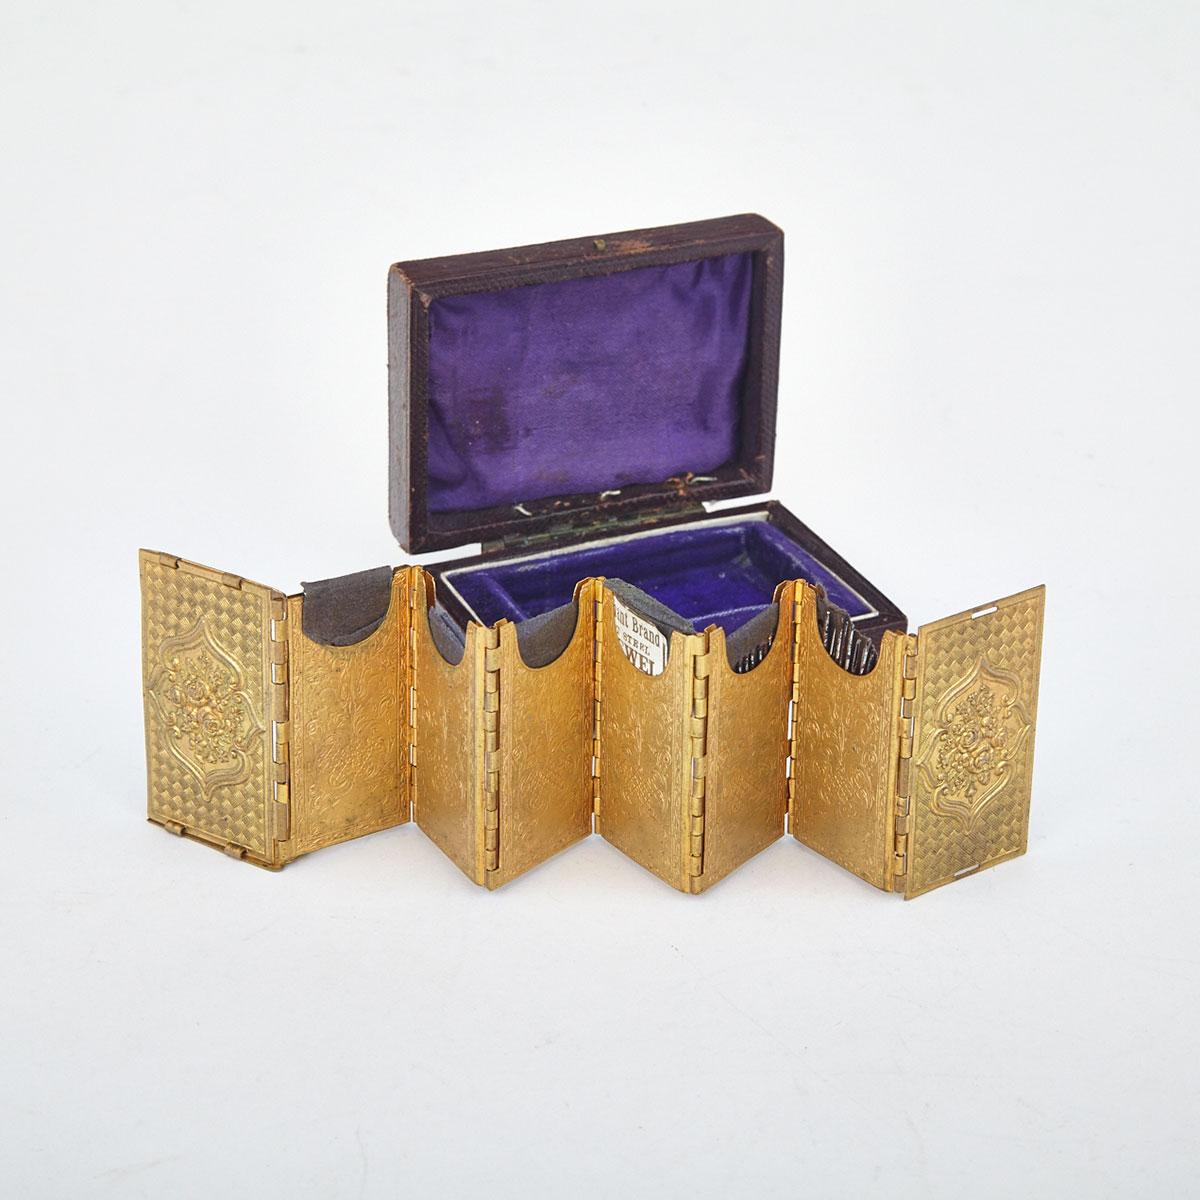 W. Avery & Son ‘Beatrice Patent’ Gilt Brass Book Form Needle Case, 2nd half, 19th century